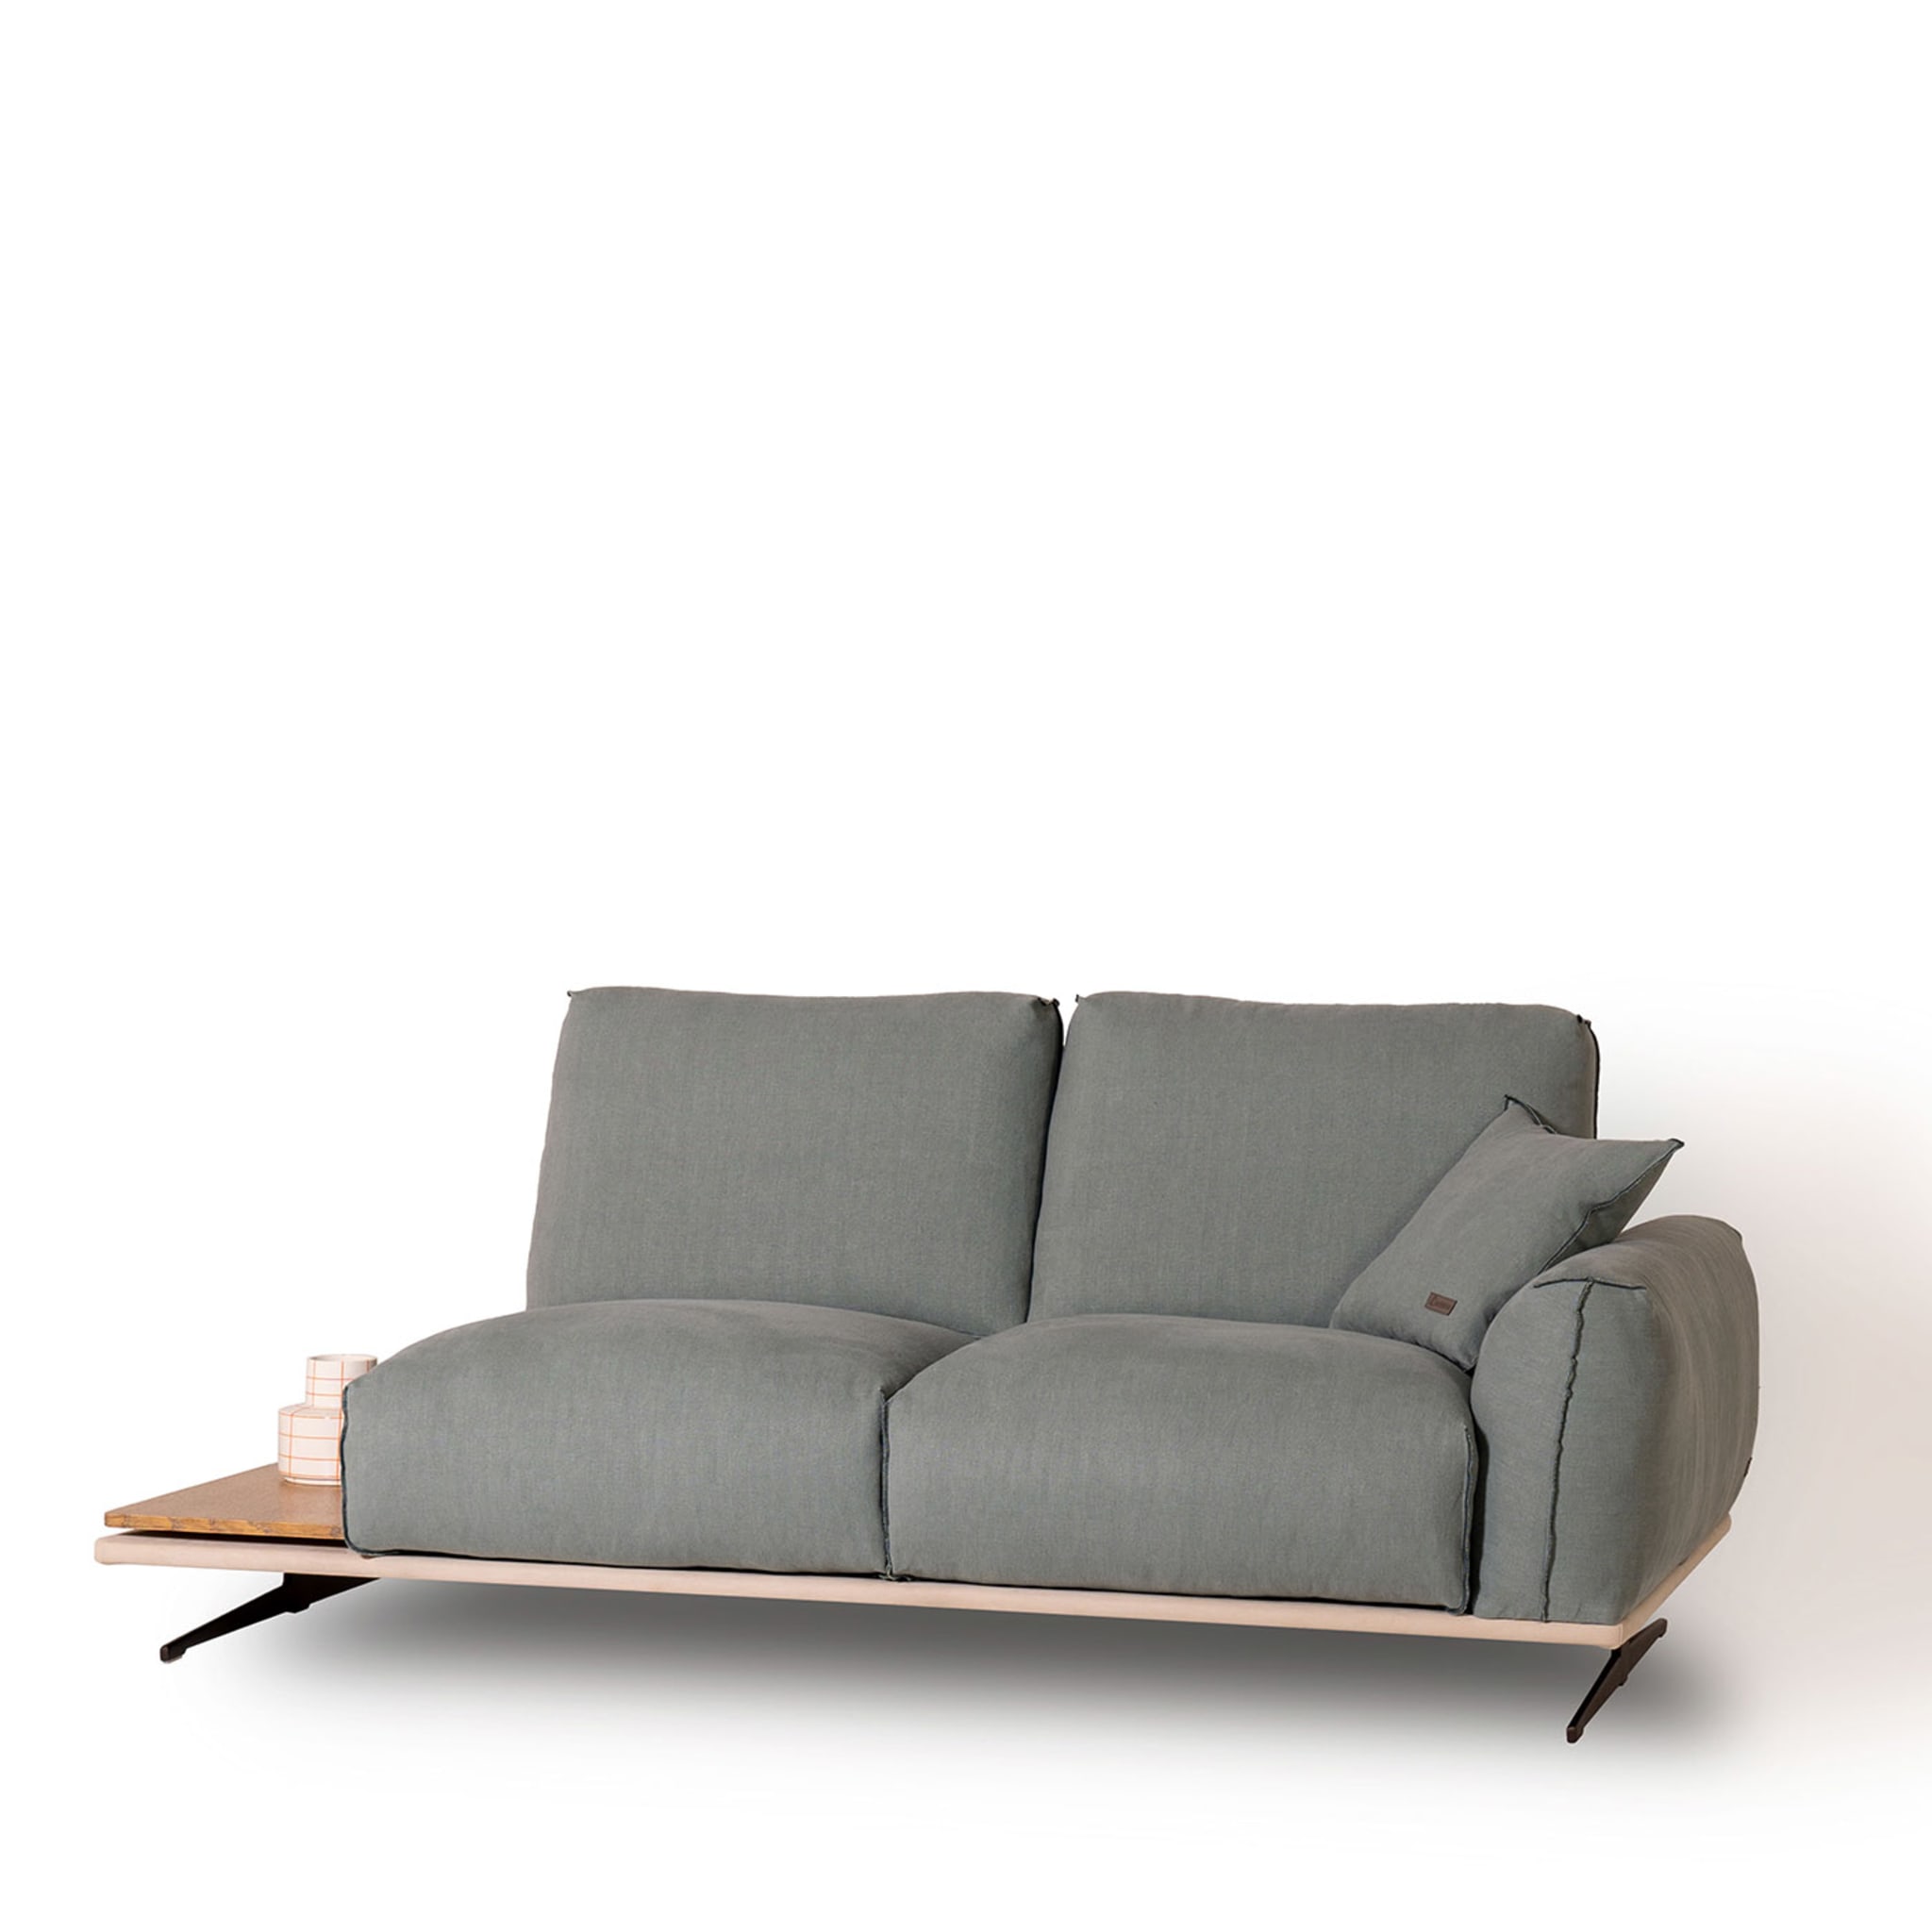 Boboli Sofa with Side Table by Marco and Giulio Mantellassi - Alternative view 2